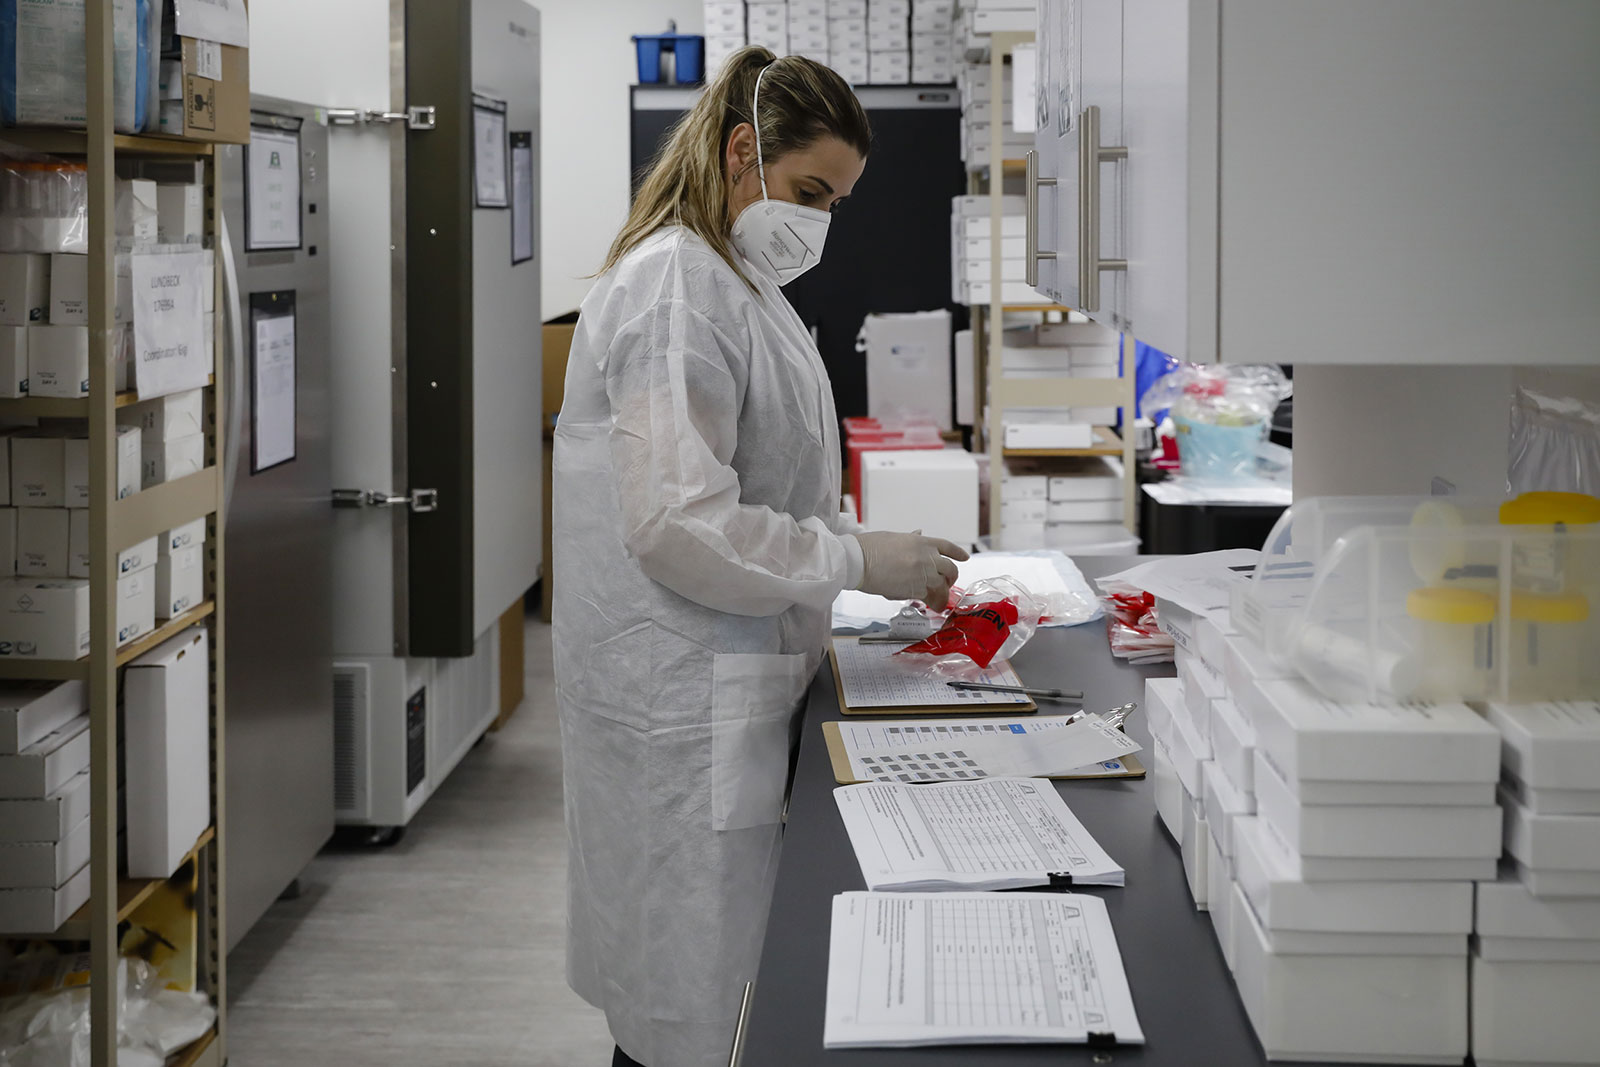 A health worker works in a lab during clinical trials for a Covid-19 vaccine at Research Centers of America in Hollywood, Florida, on September 9.